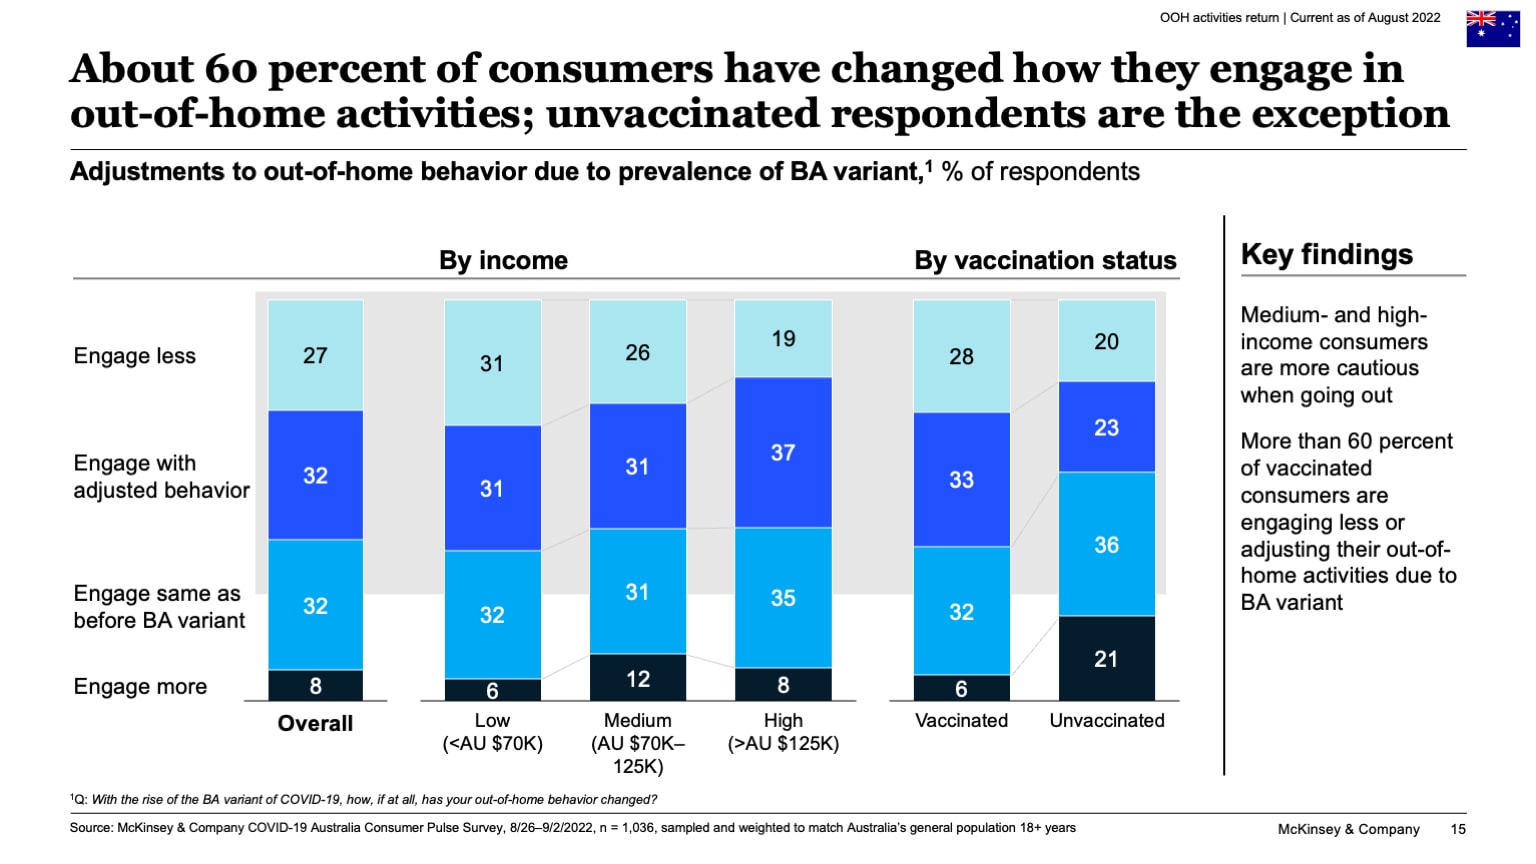 About 60 percent of consumers have changed how they engage in out-of-home activities; unvaccinated respondents are the exception